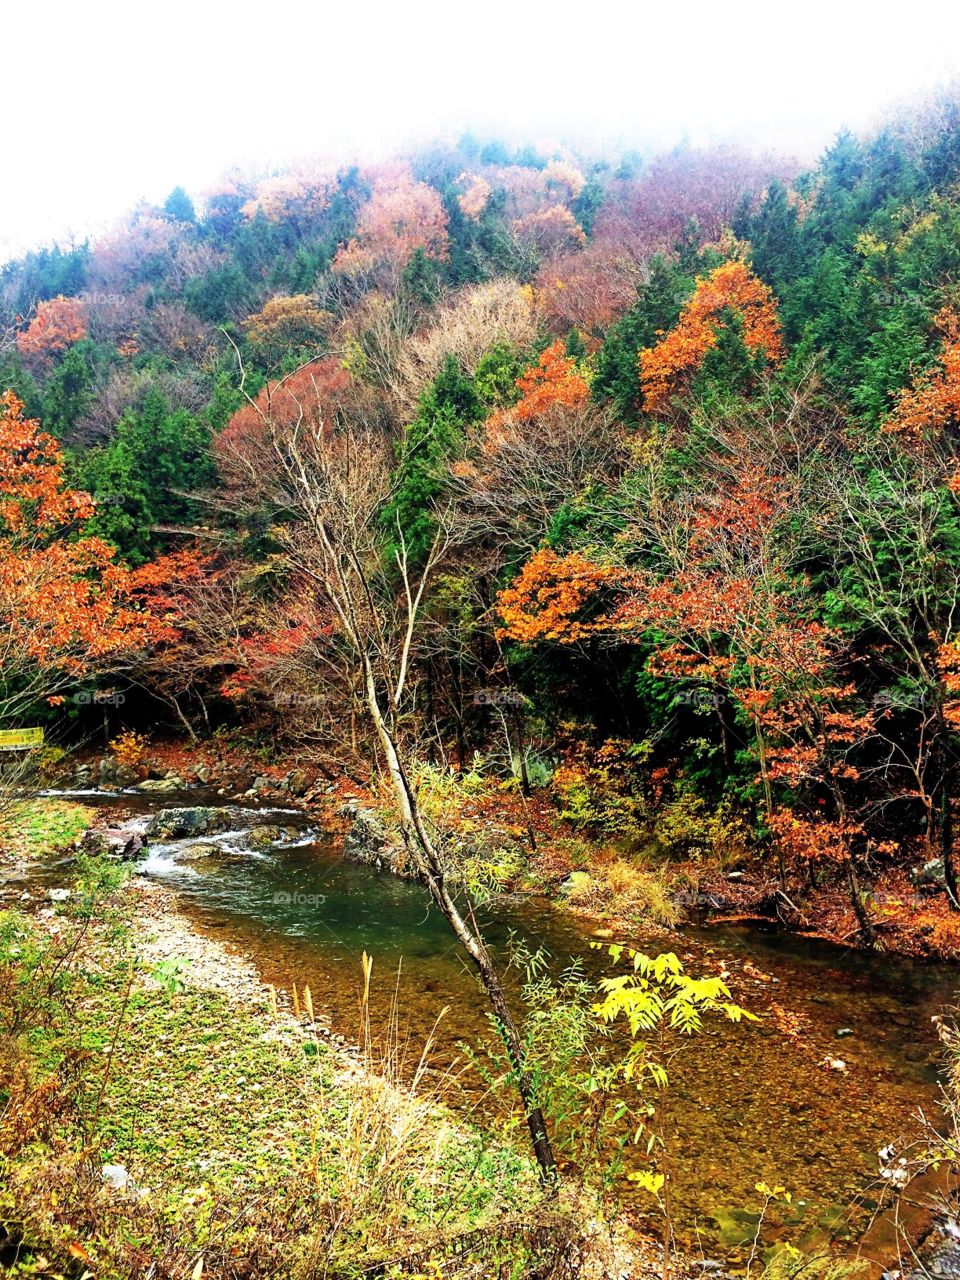 just another place where i fell in love again... Autumn when in south Korea.